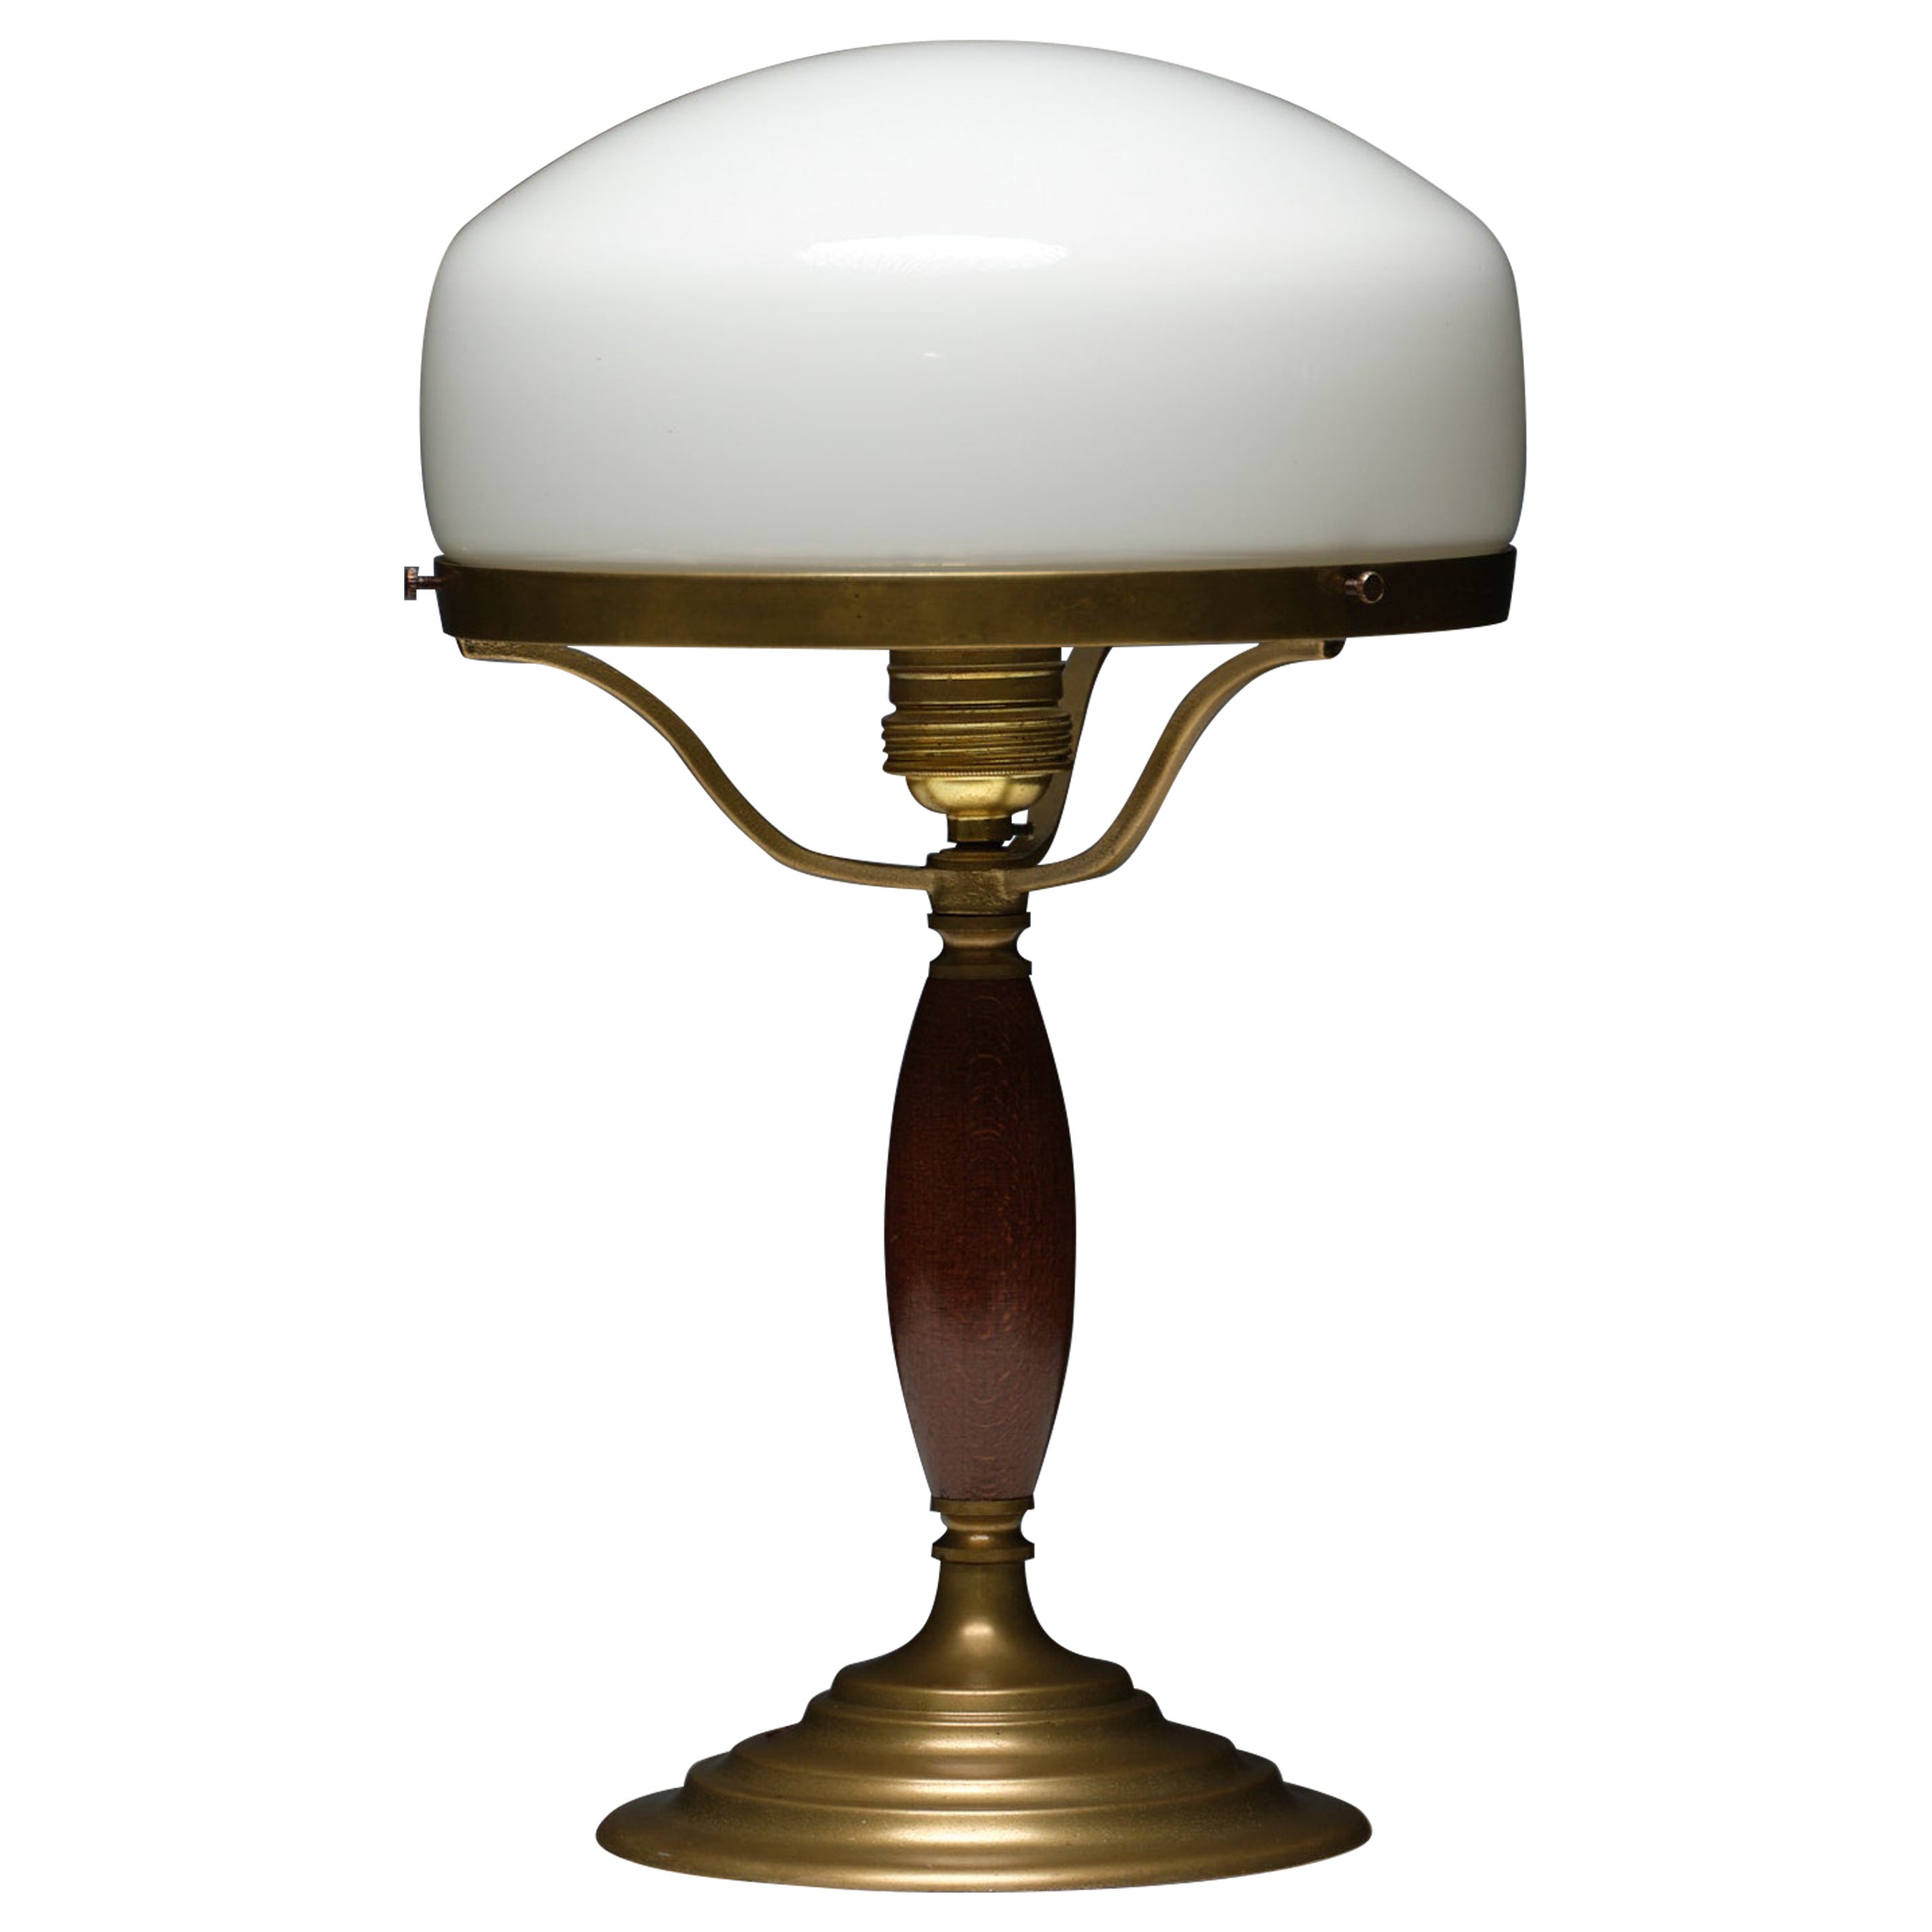 Elegant Midcentury Vintage Table Lamp - Brass Beauty with Original Patina For Sale